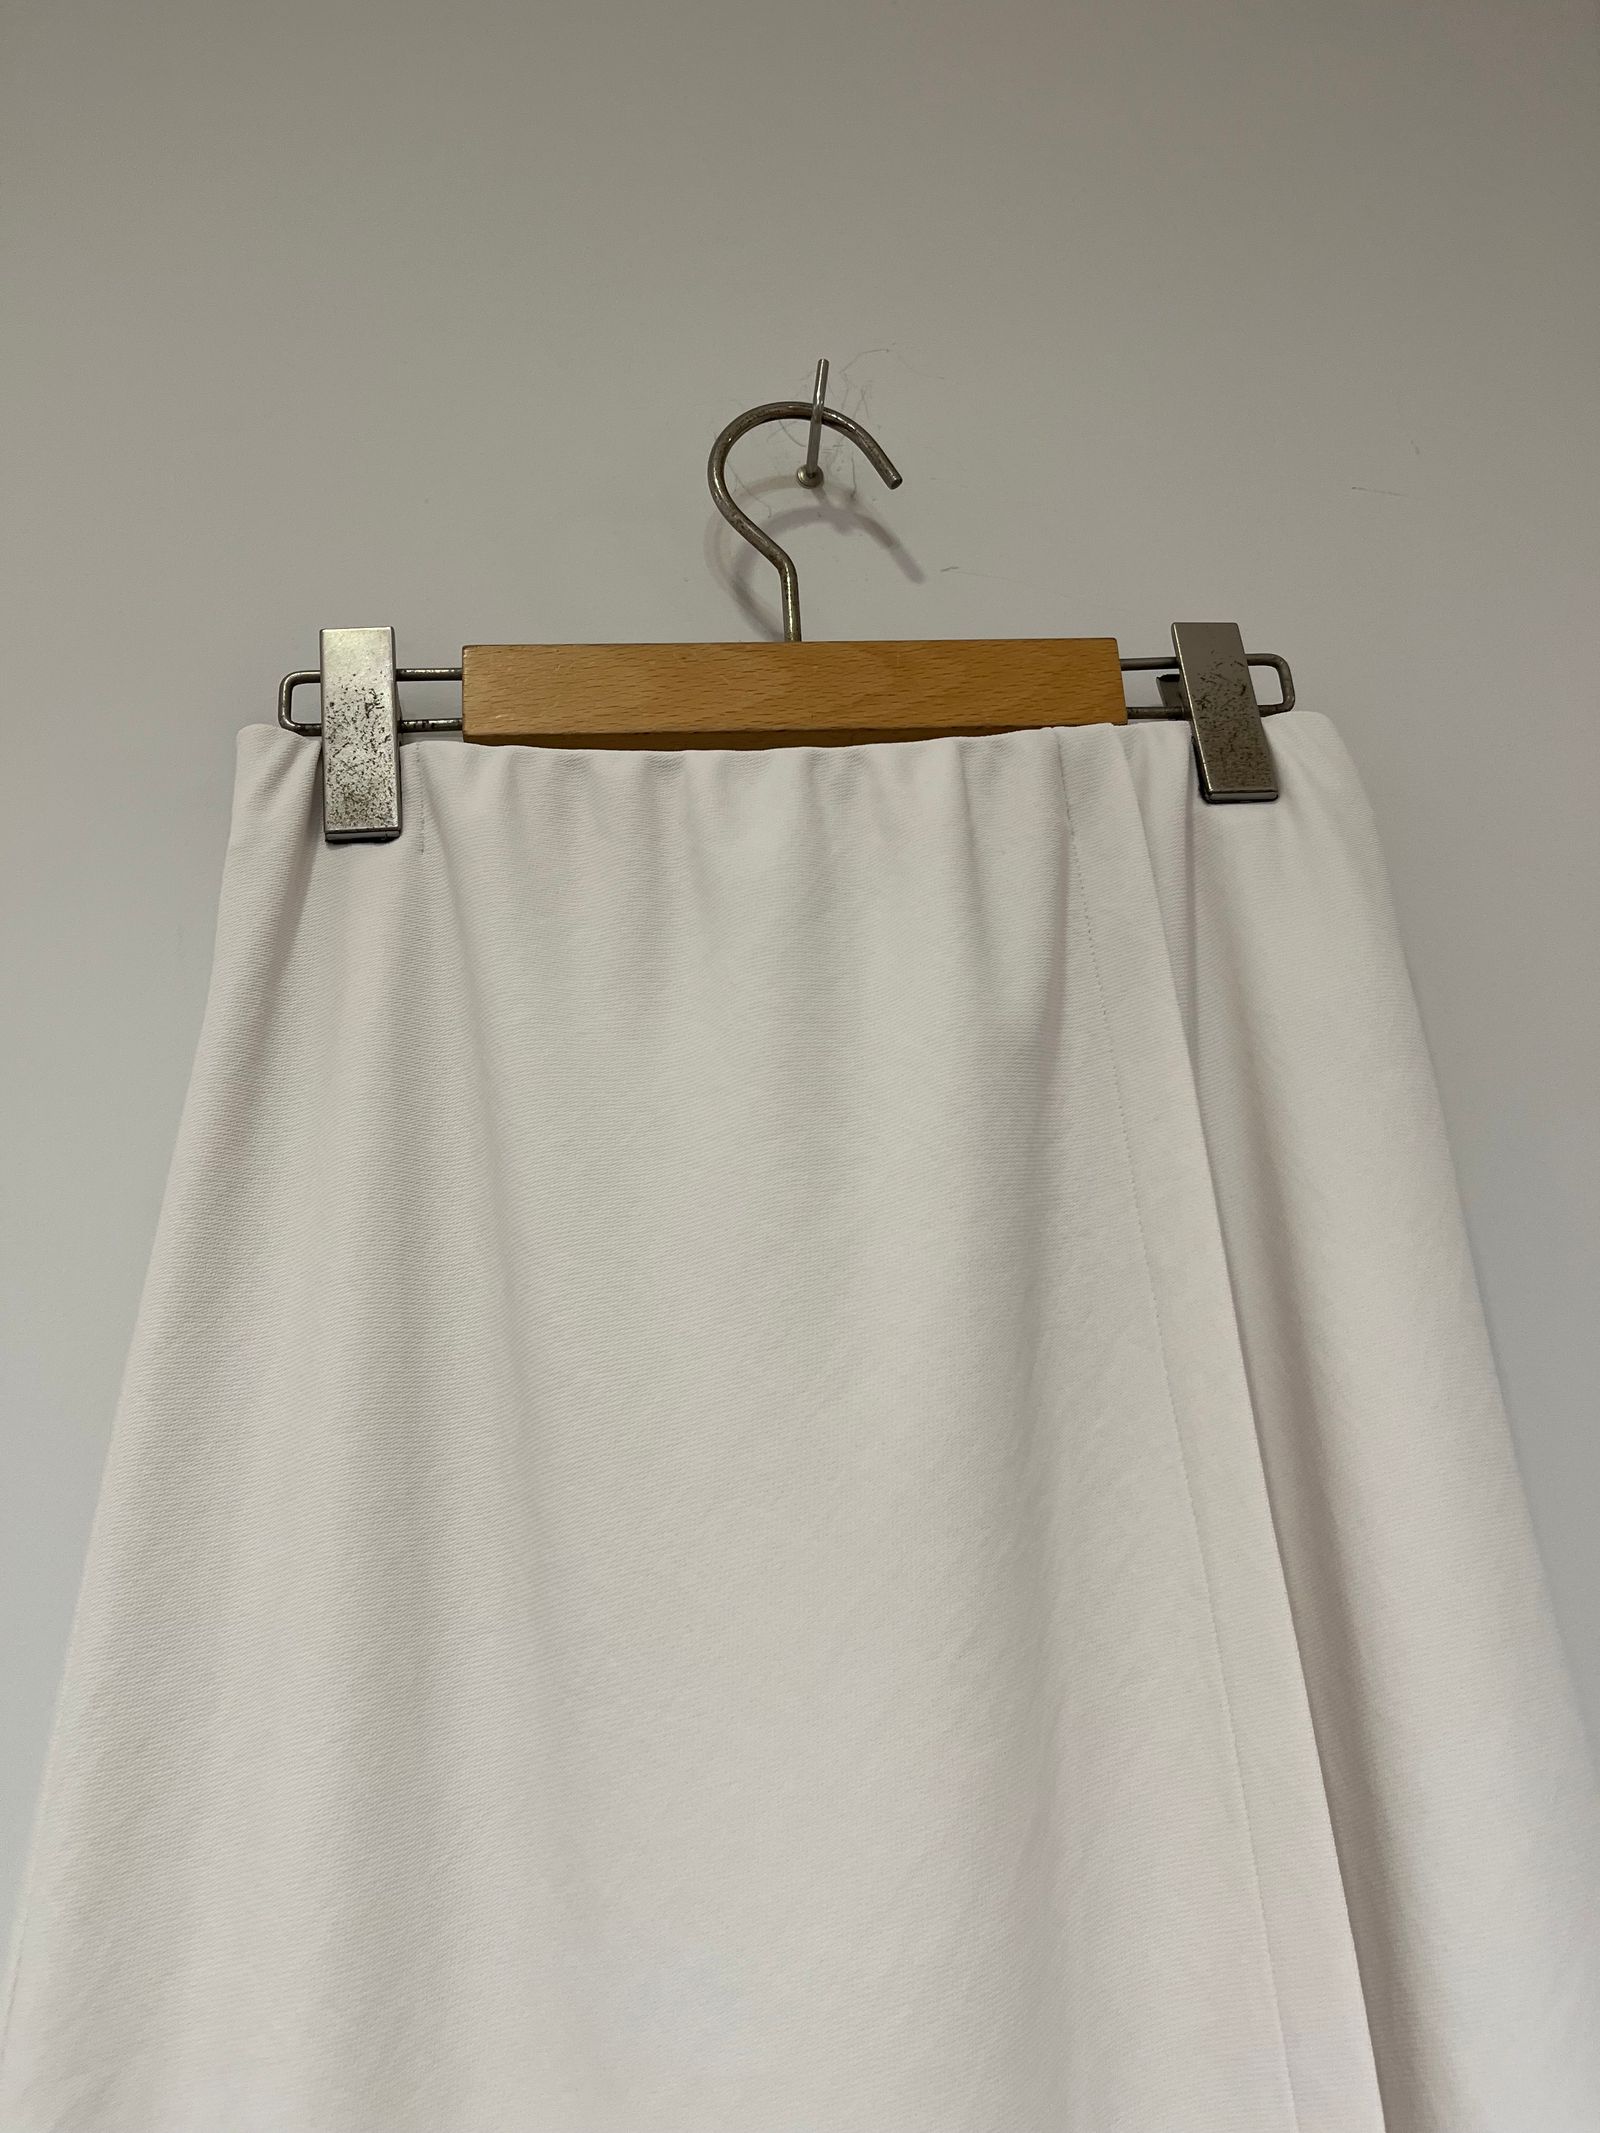 Greed International - Stretch Relax 2way Cloth Skirt in Off White